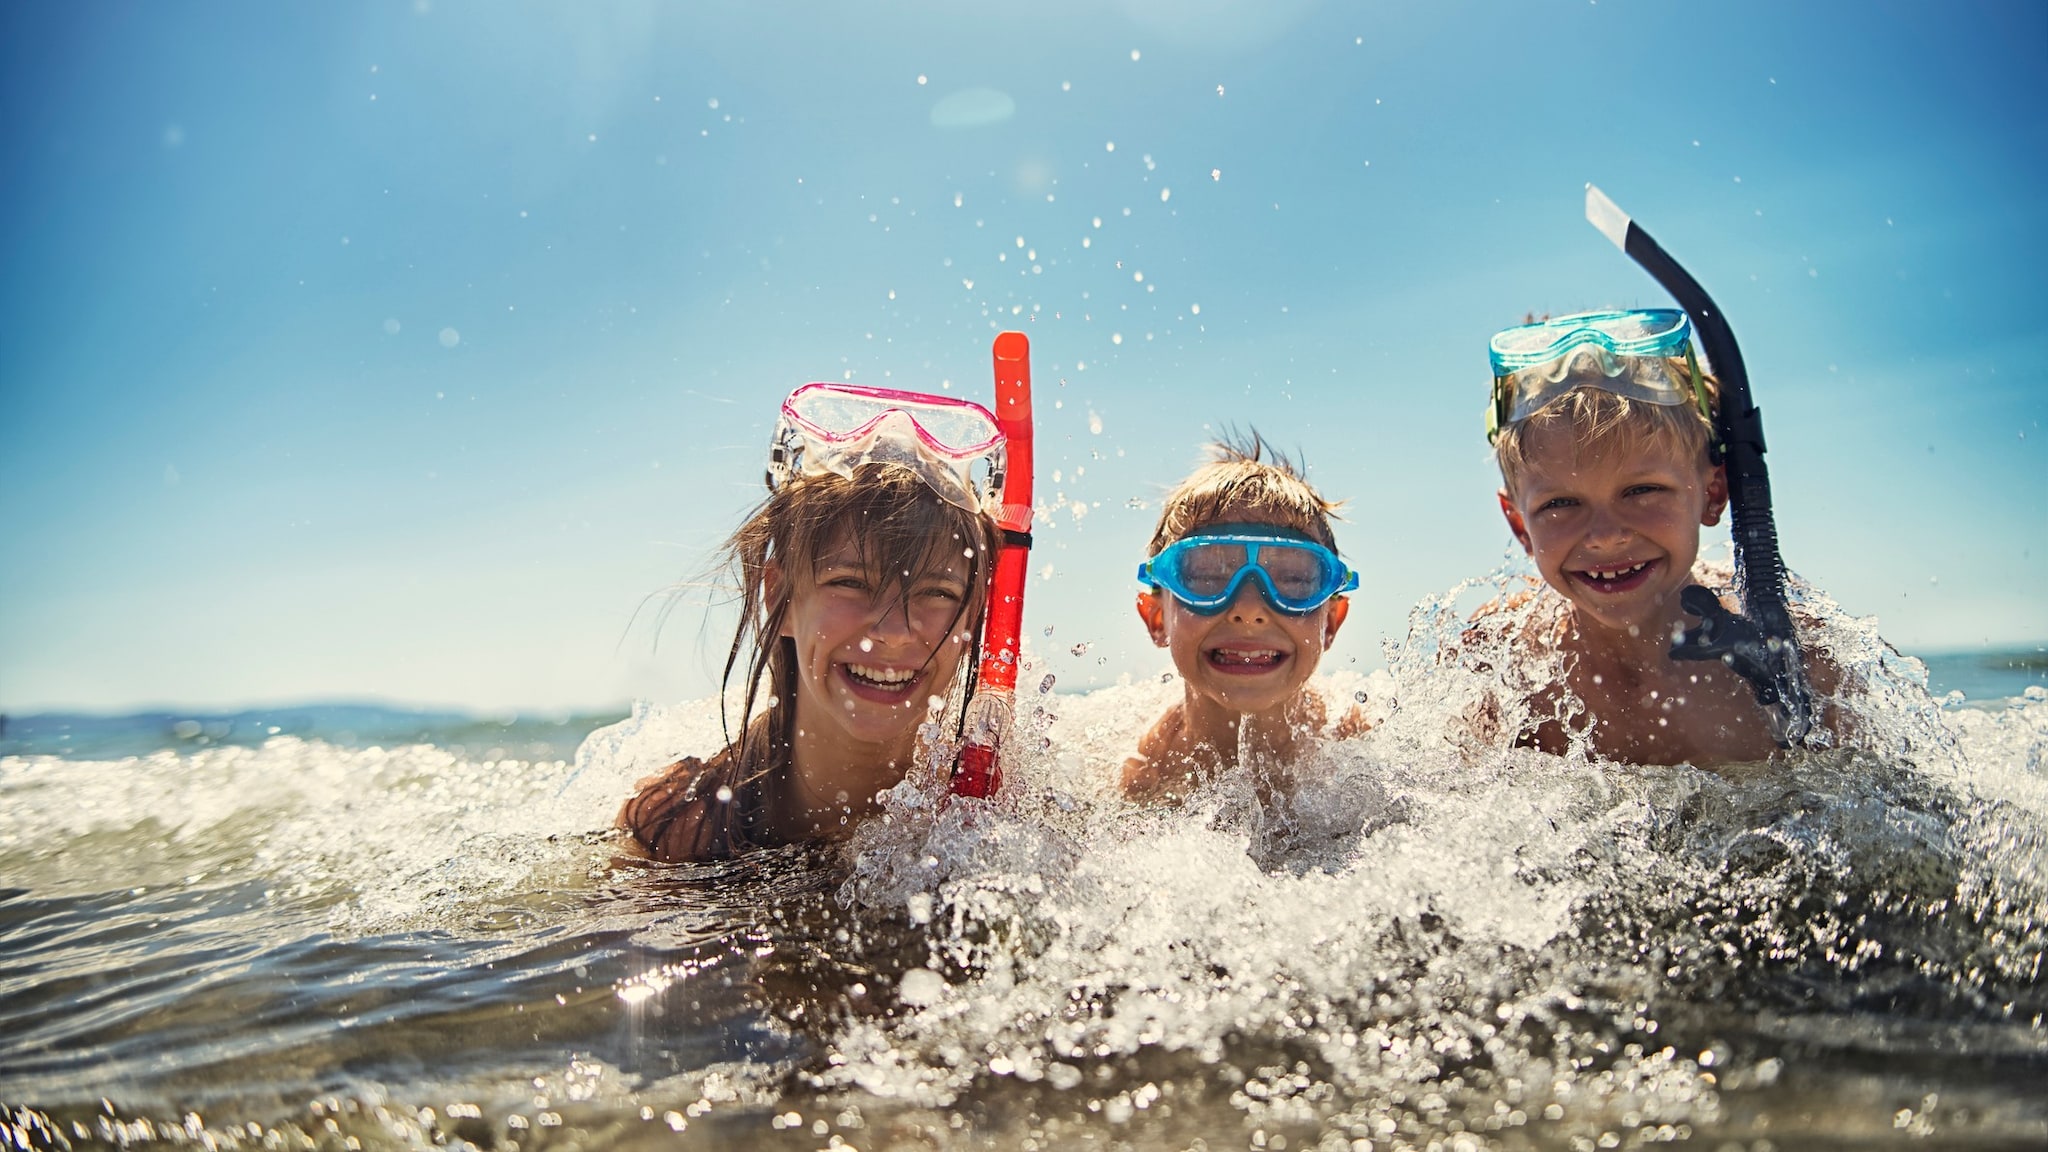 Three kids playing in the ocean together while wearing snorkels.